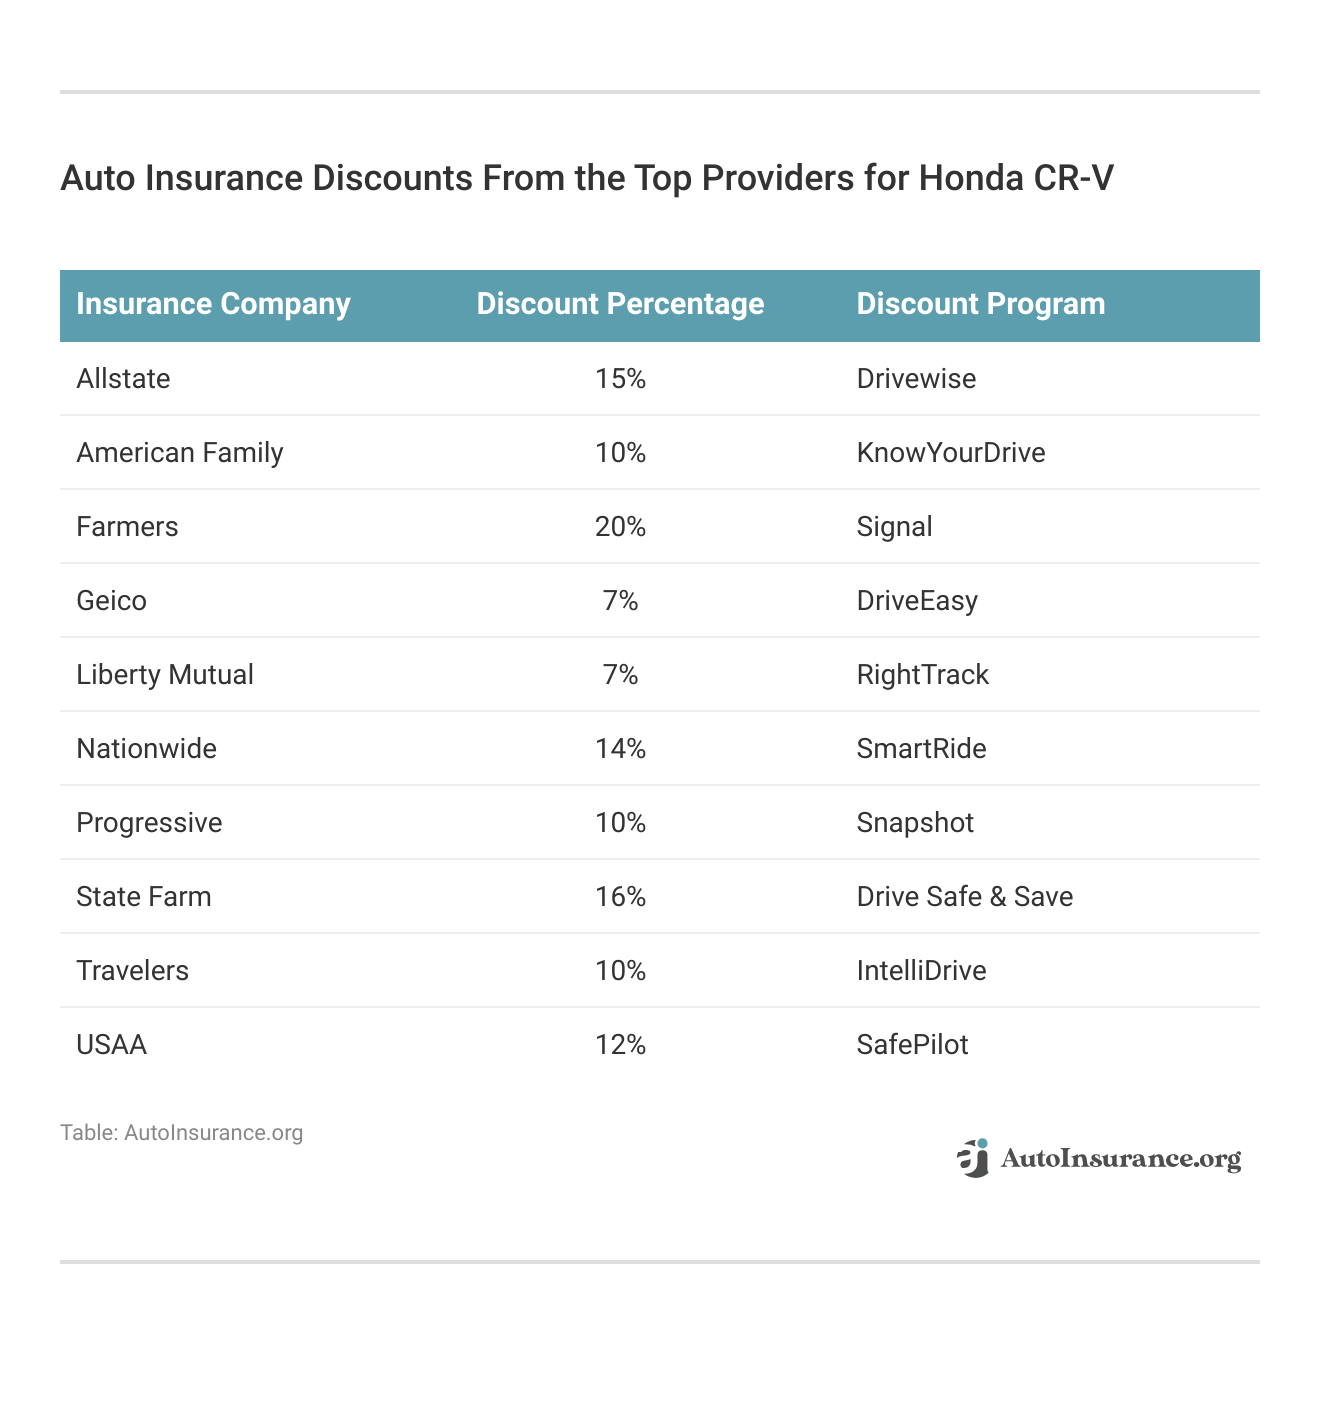 <h3>Auto Insurance Discounts From the Top Providers for Honda CR-V</h3>